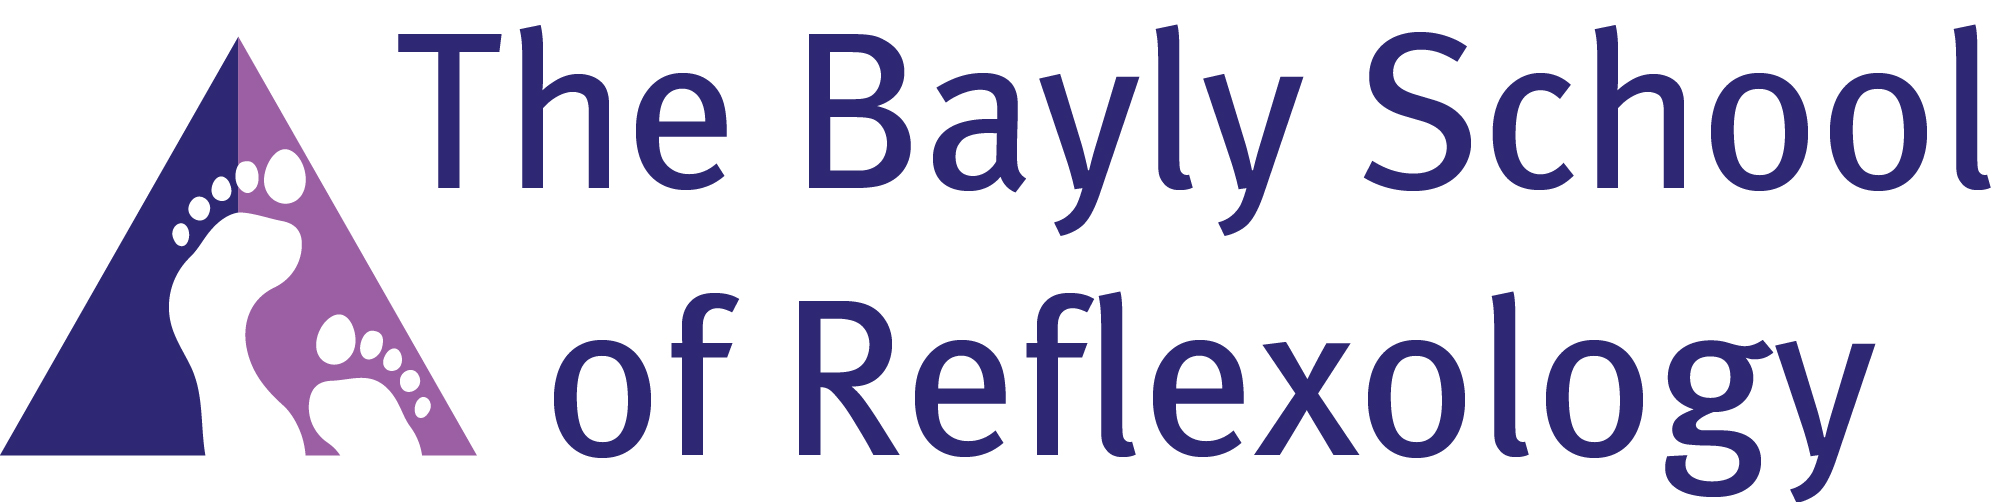 Open The Bayly School Of Reflexology in new tab